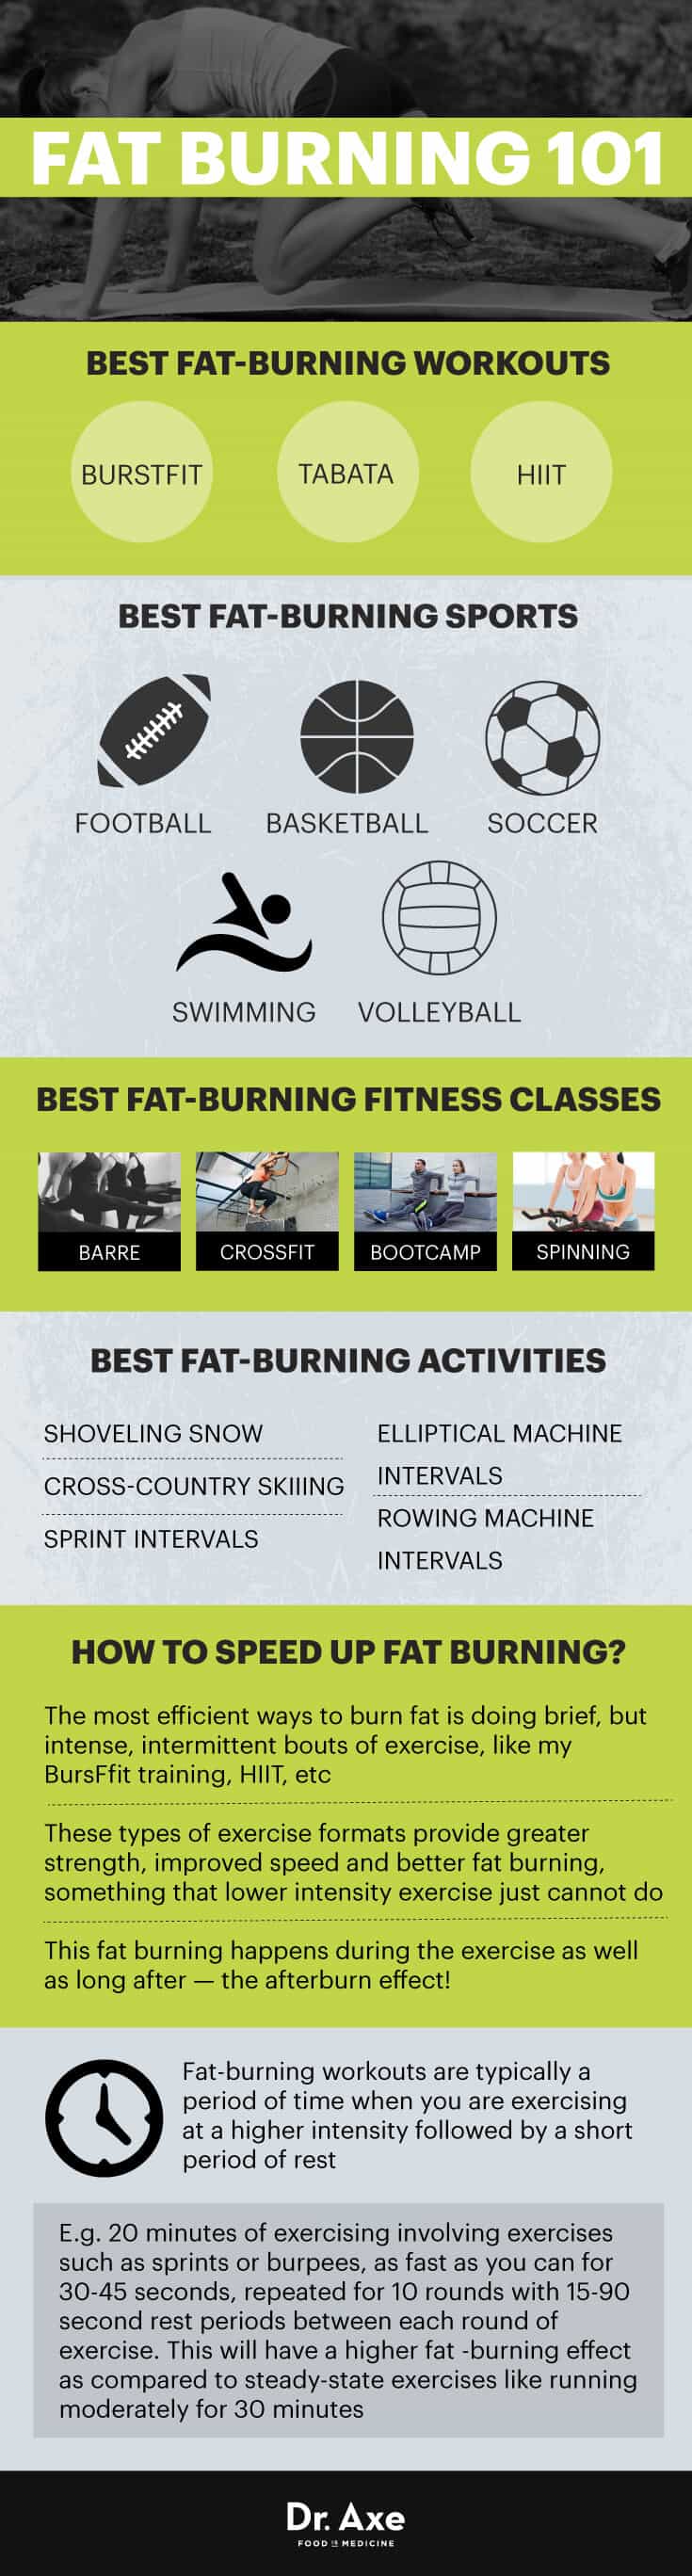 Fat burning workouts 101 - Dr. Axe